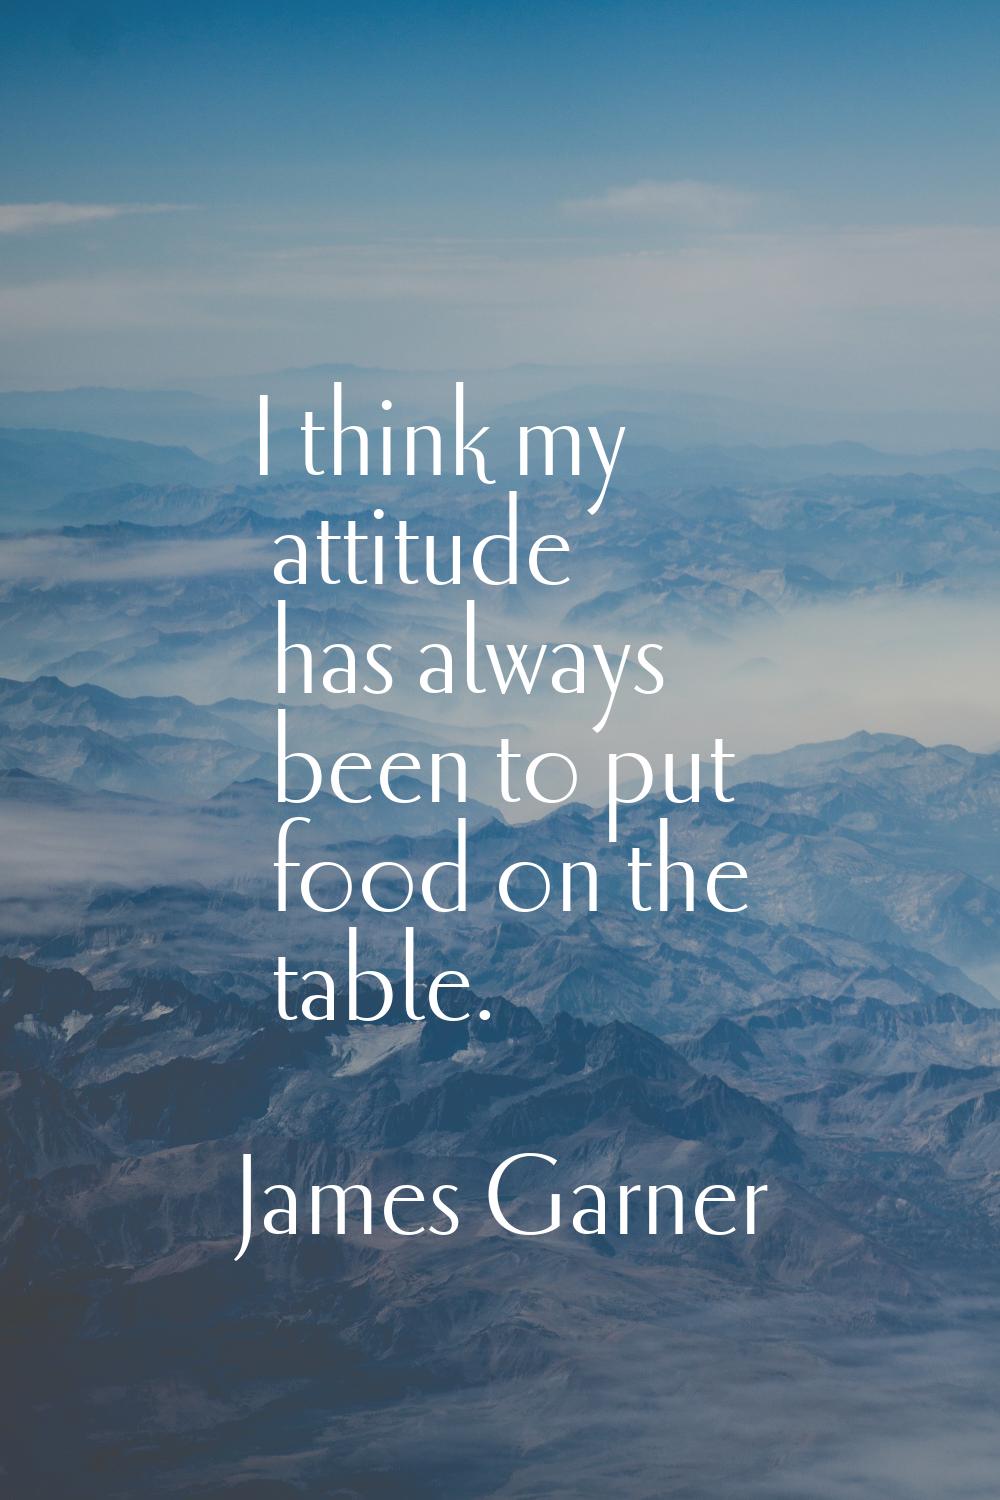 I think my attitude has always been to put food on the table.